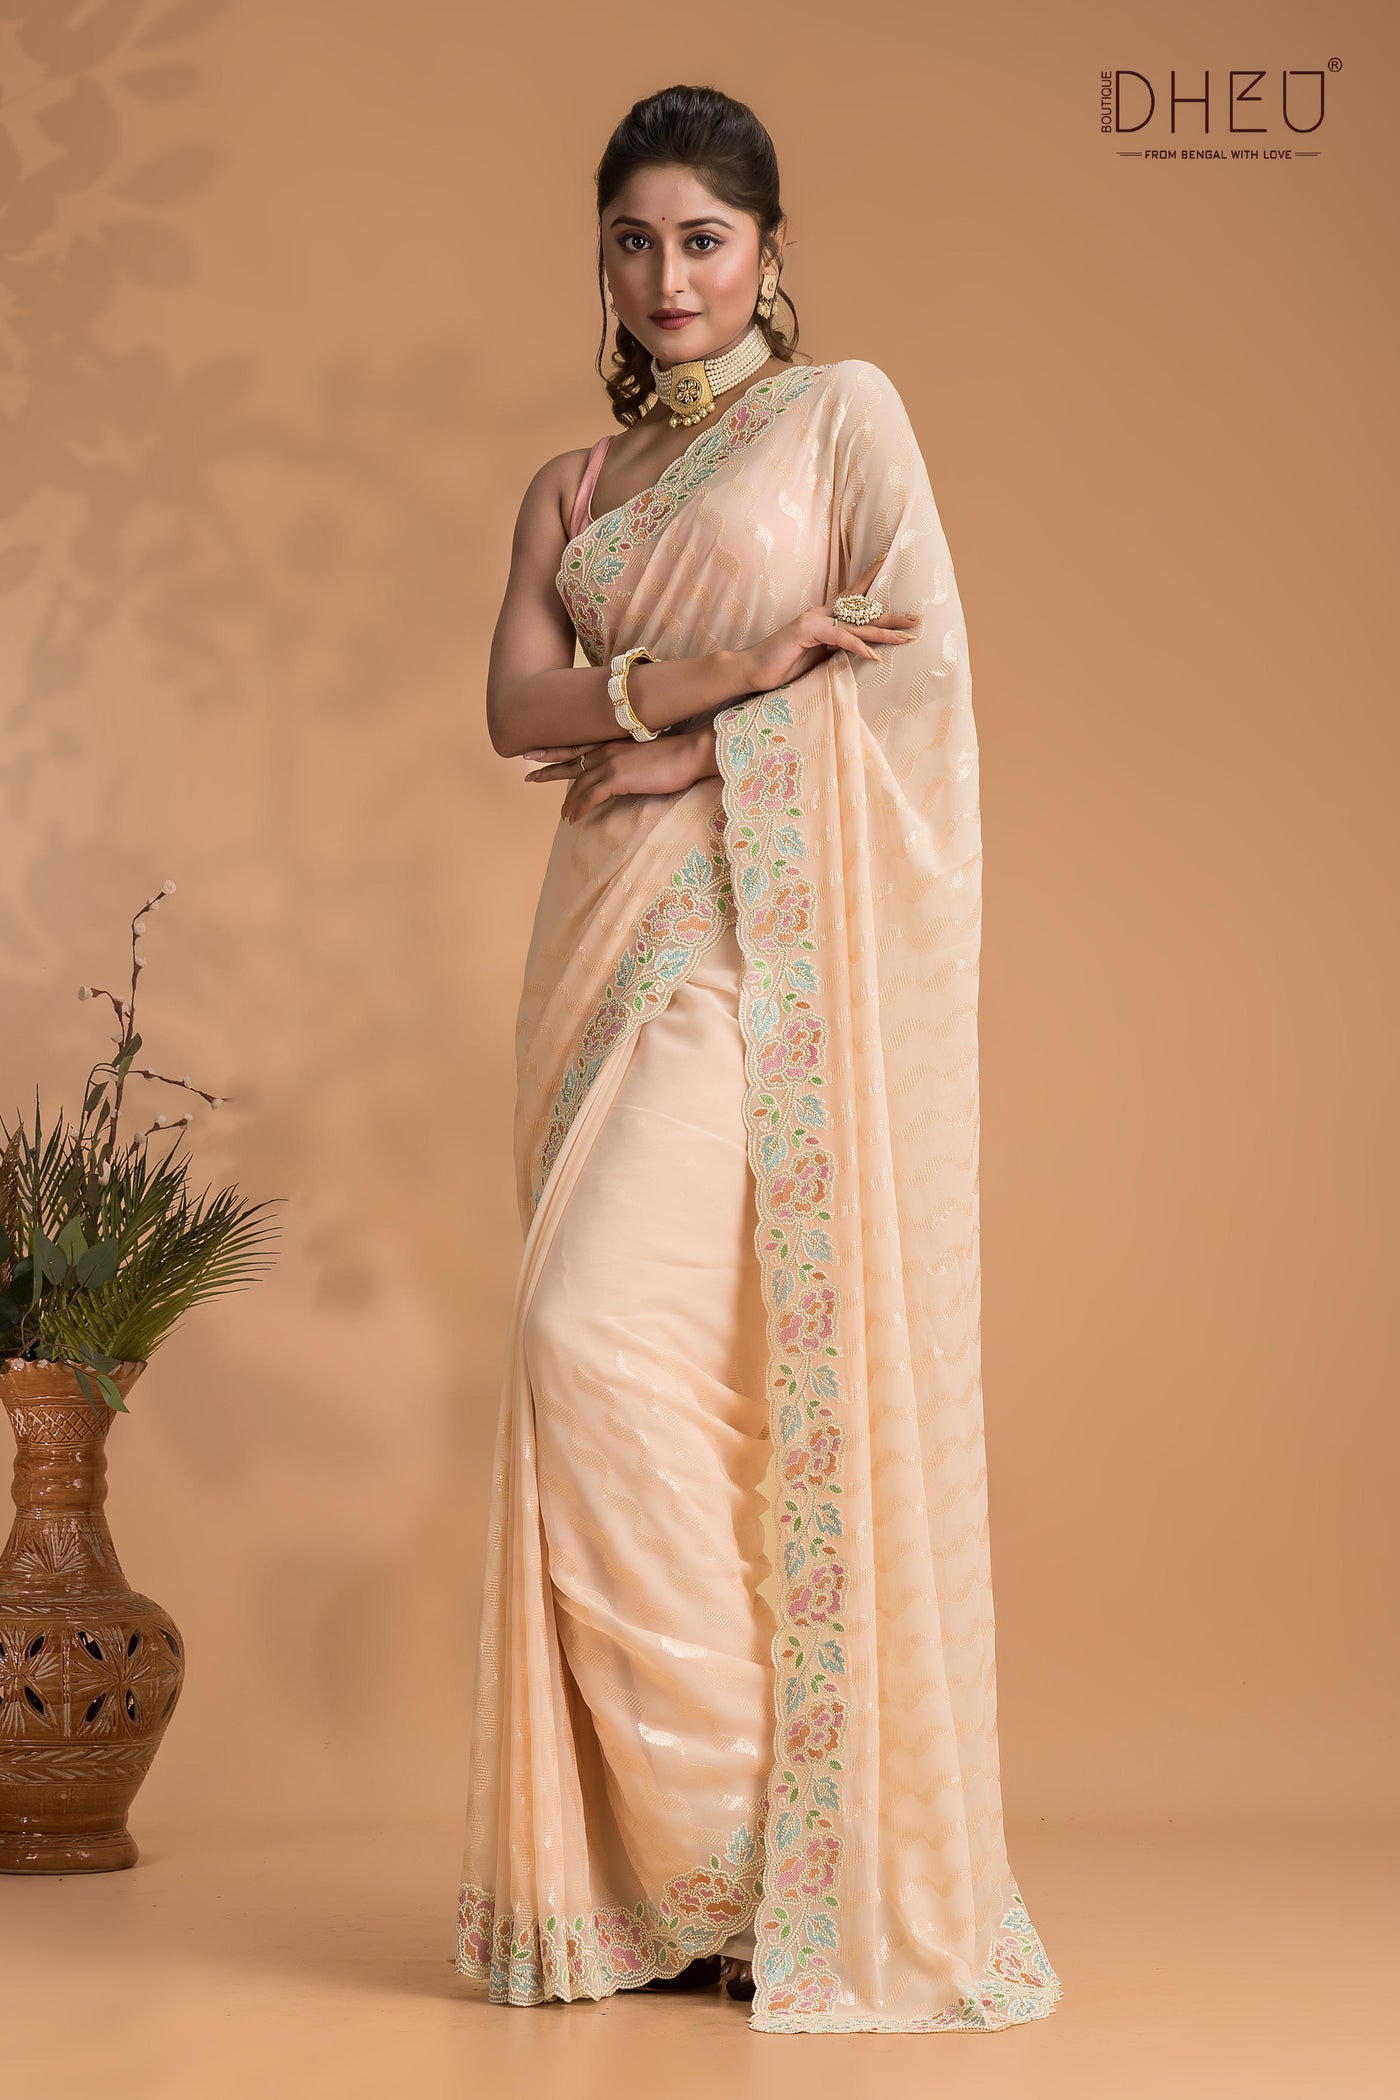 Designer chiffon georgette saree at lowest cost only at dheu.in